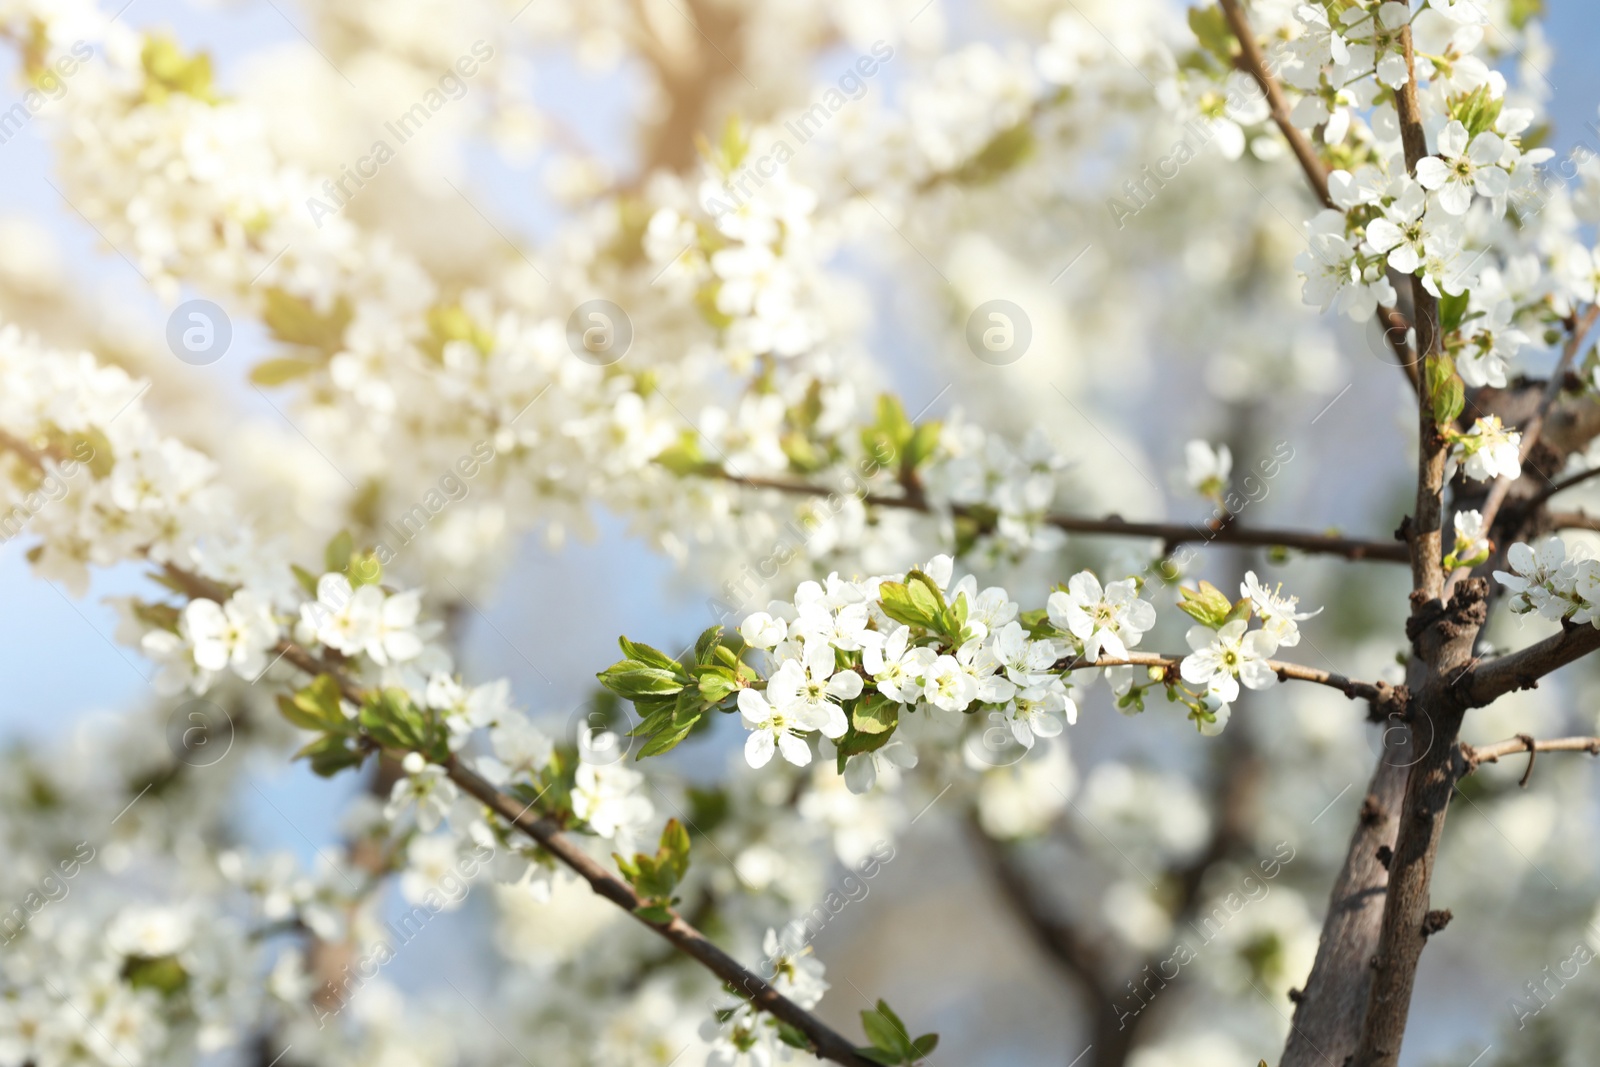 Photo of Branches of blossoming cherry plum tree against blue sky, closeup